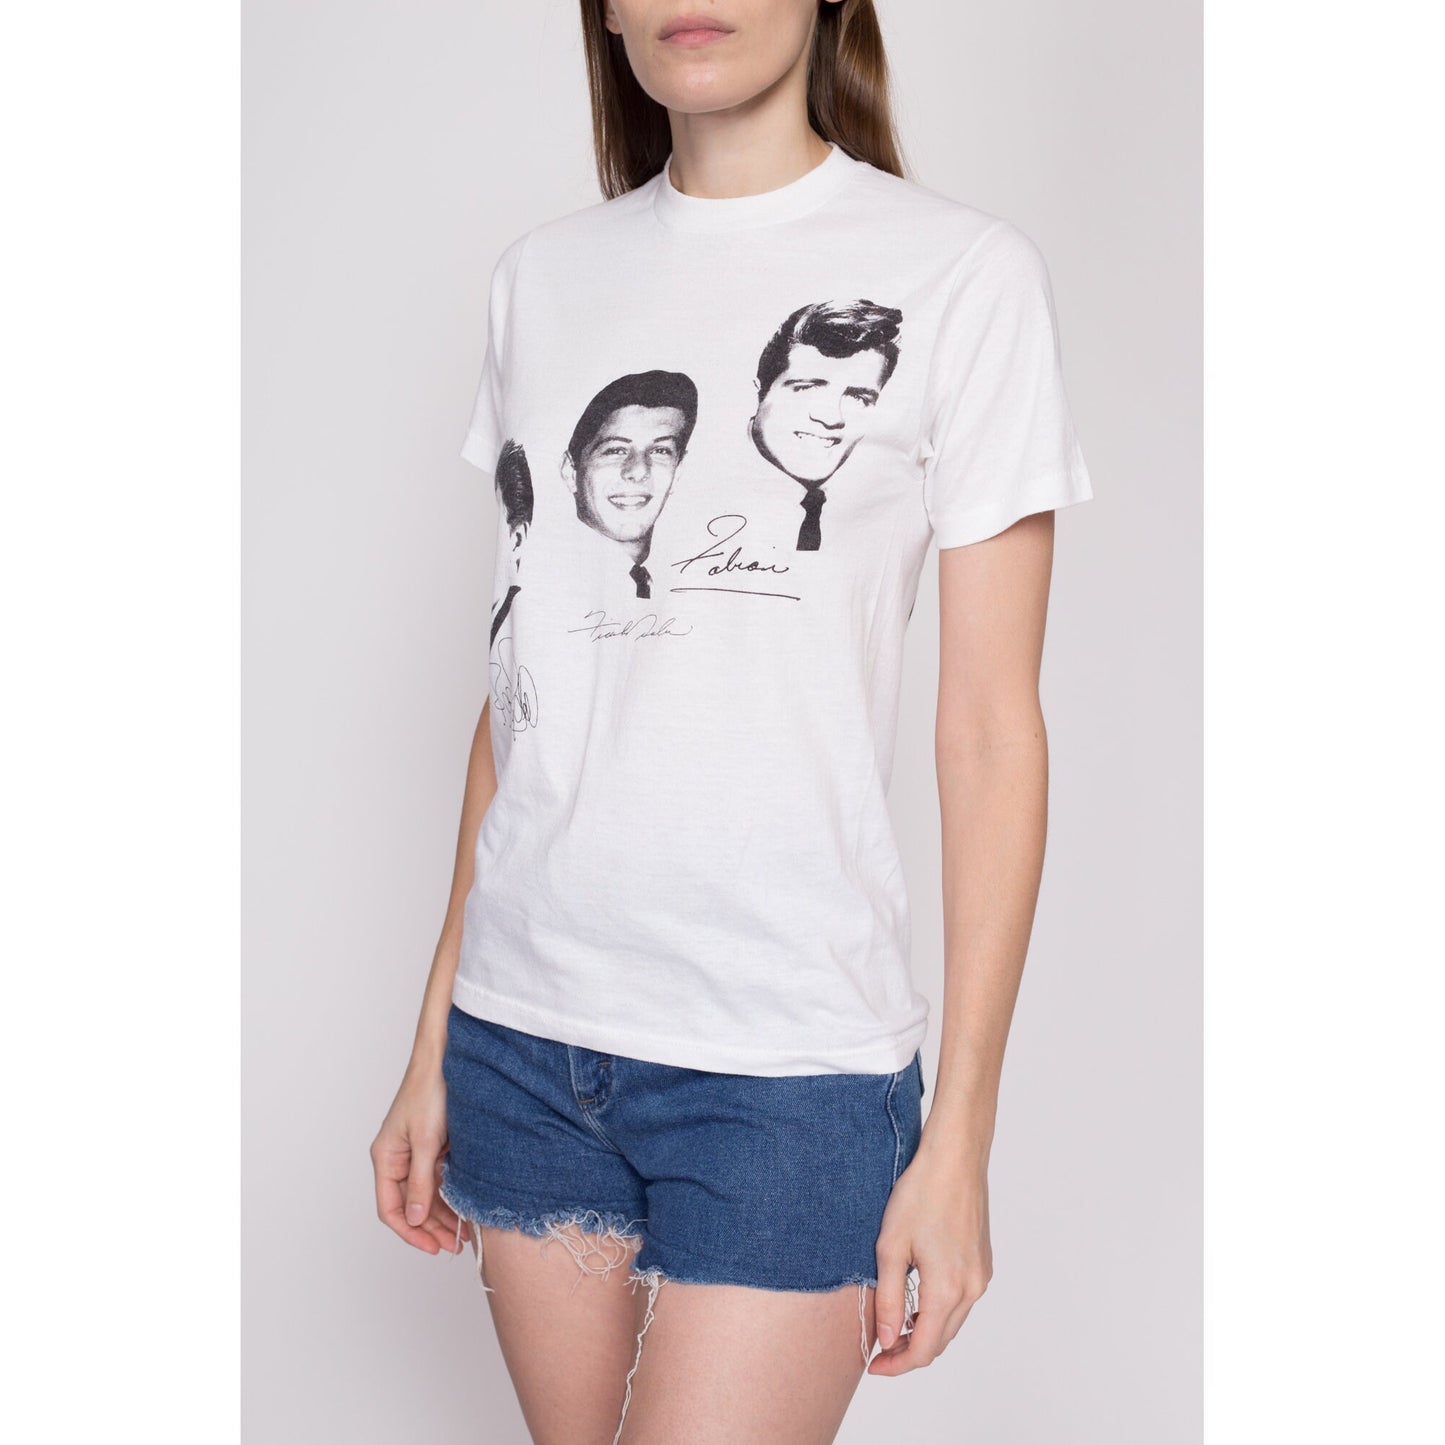 XS-S| 80s Dick Fox's Golden Boys Of Bandstand T Shirt - Unisex XS to Small | Vintage Autograph Print Graphic Music Tee